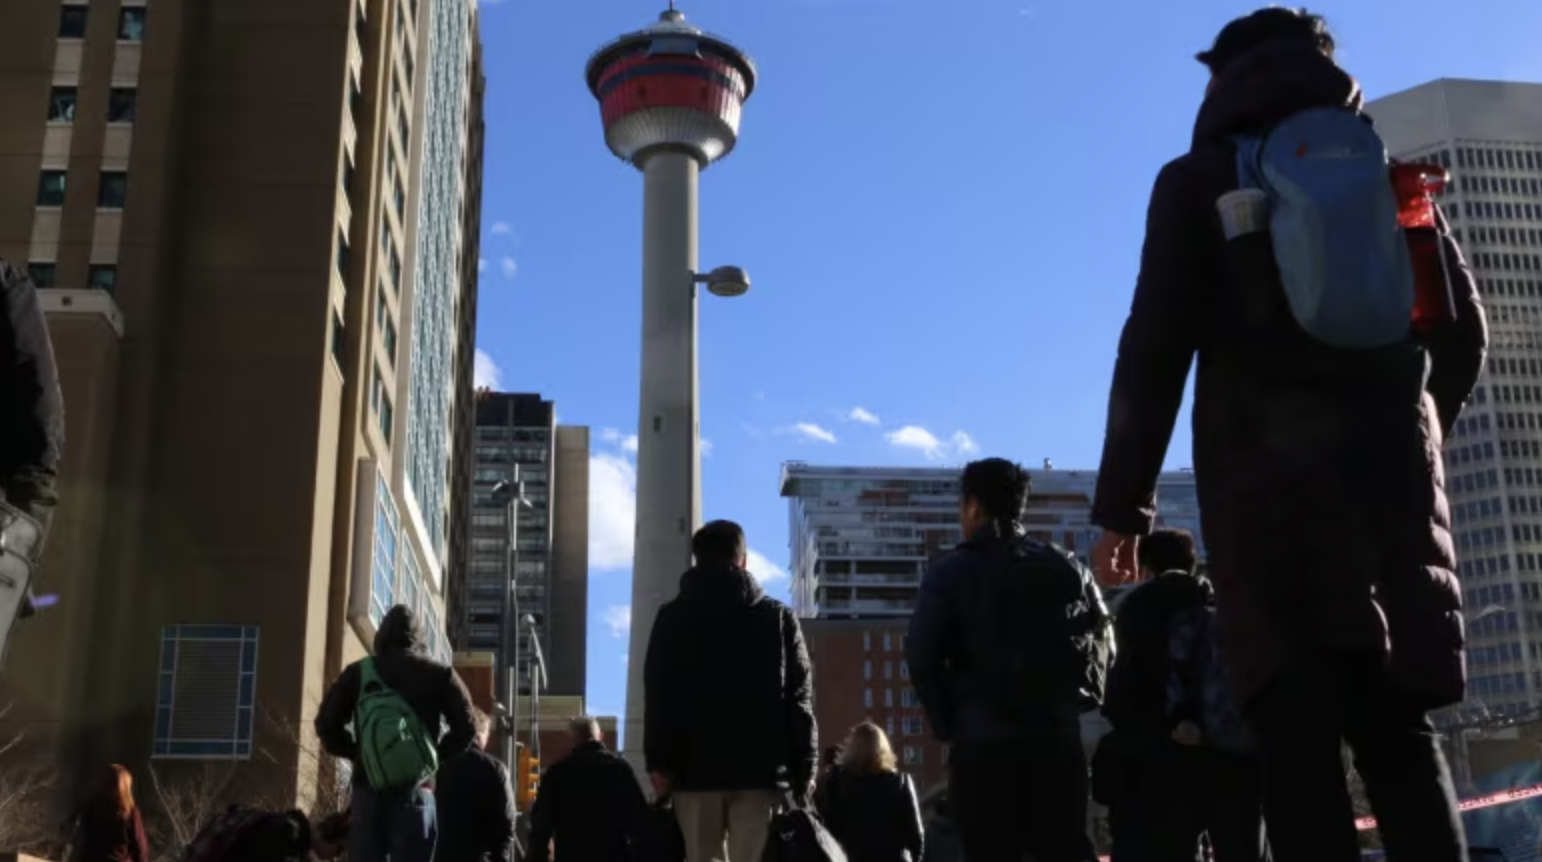 Alberta's population surges by record-setting 202,000 people